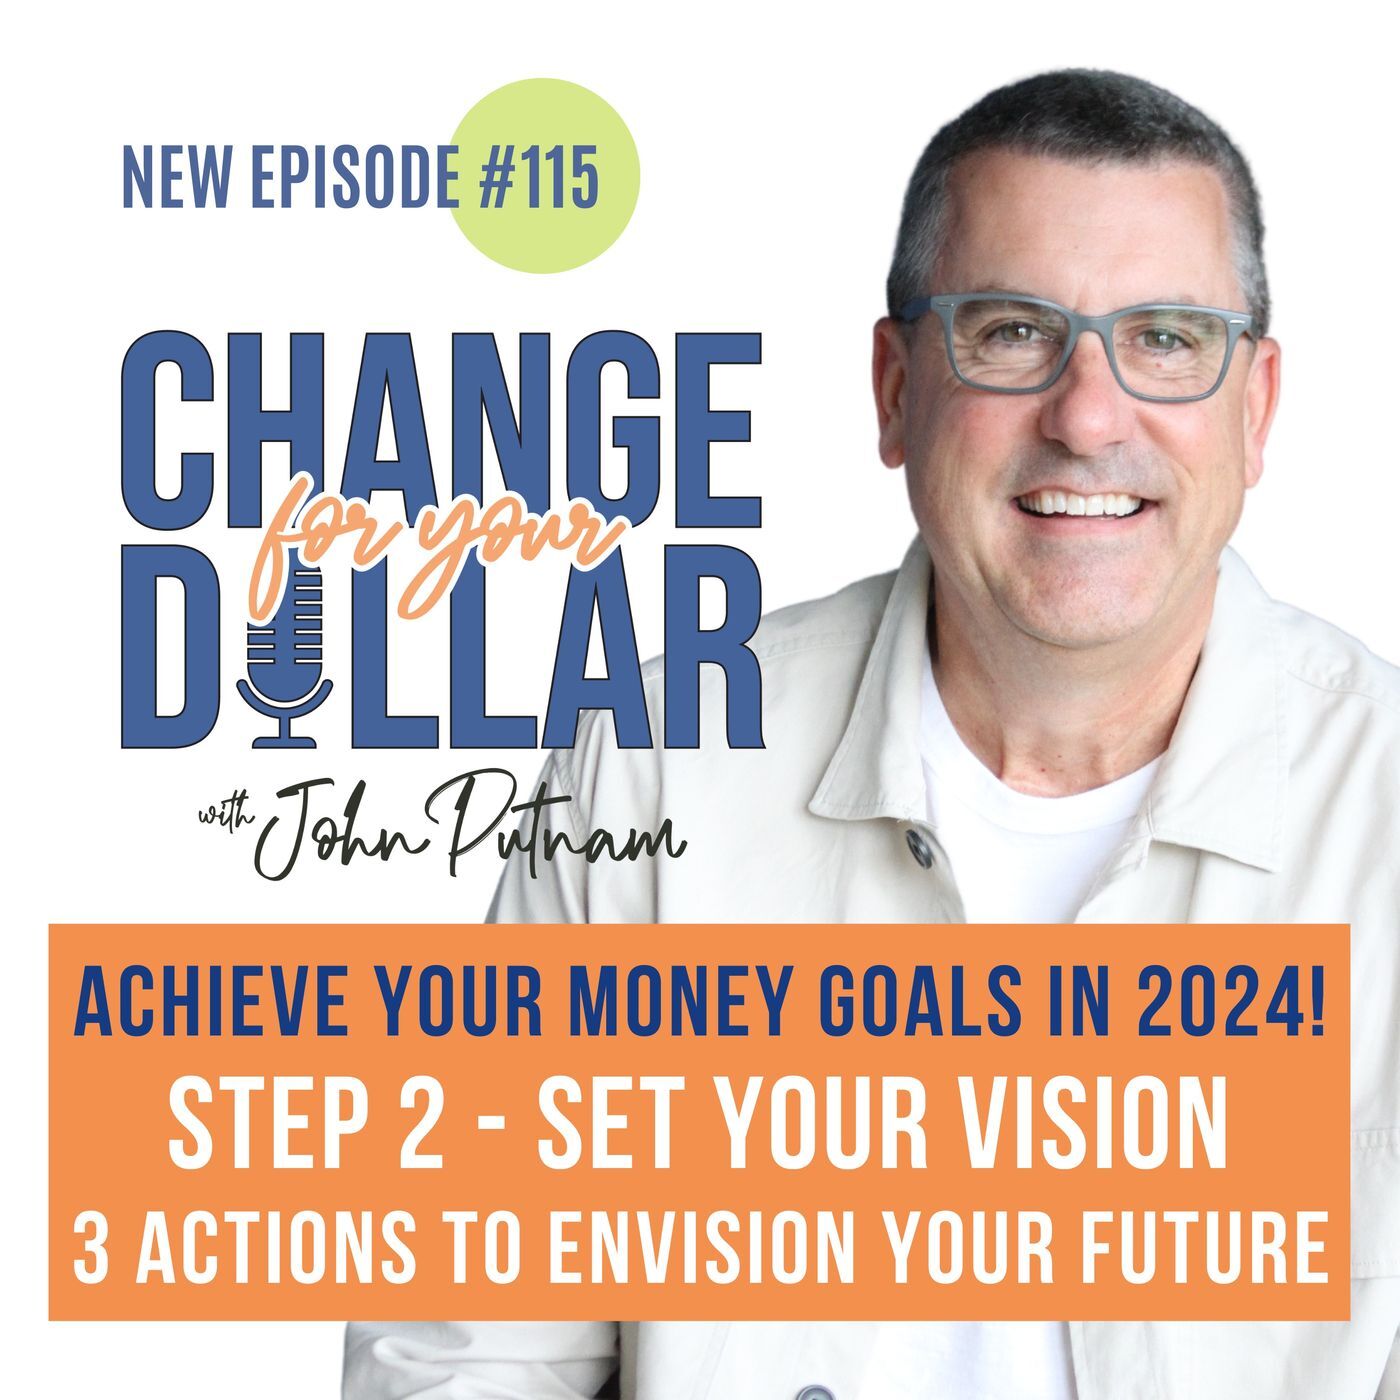 115 - Achieve your Money Goals in 2024! Step 2 - SET YOUR VISION with 3 Key Actions